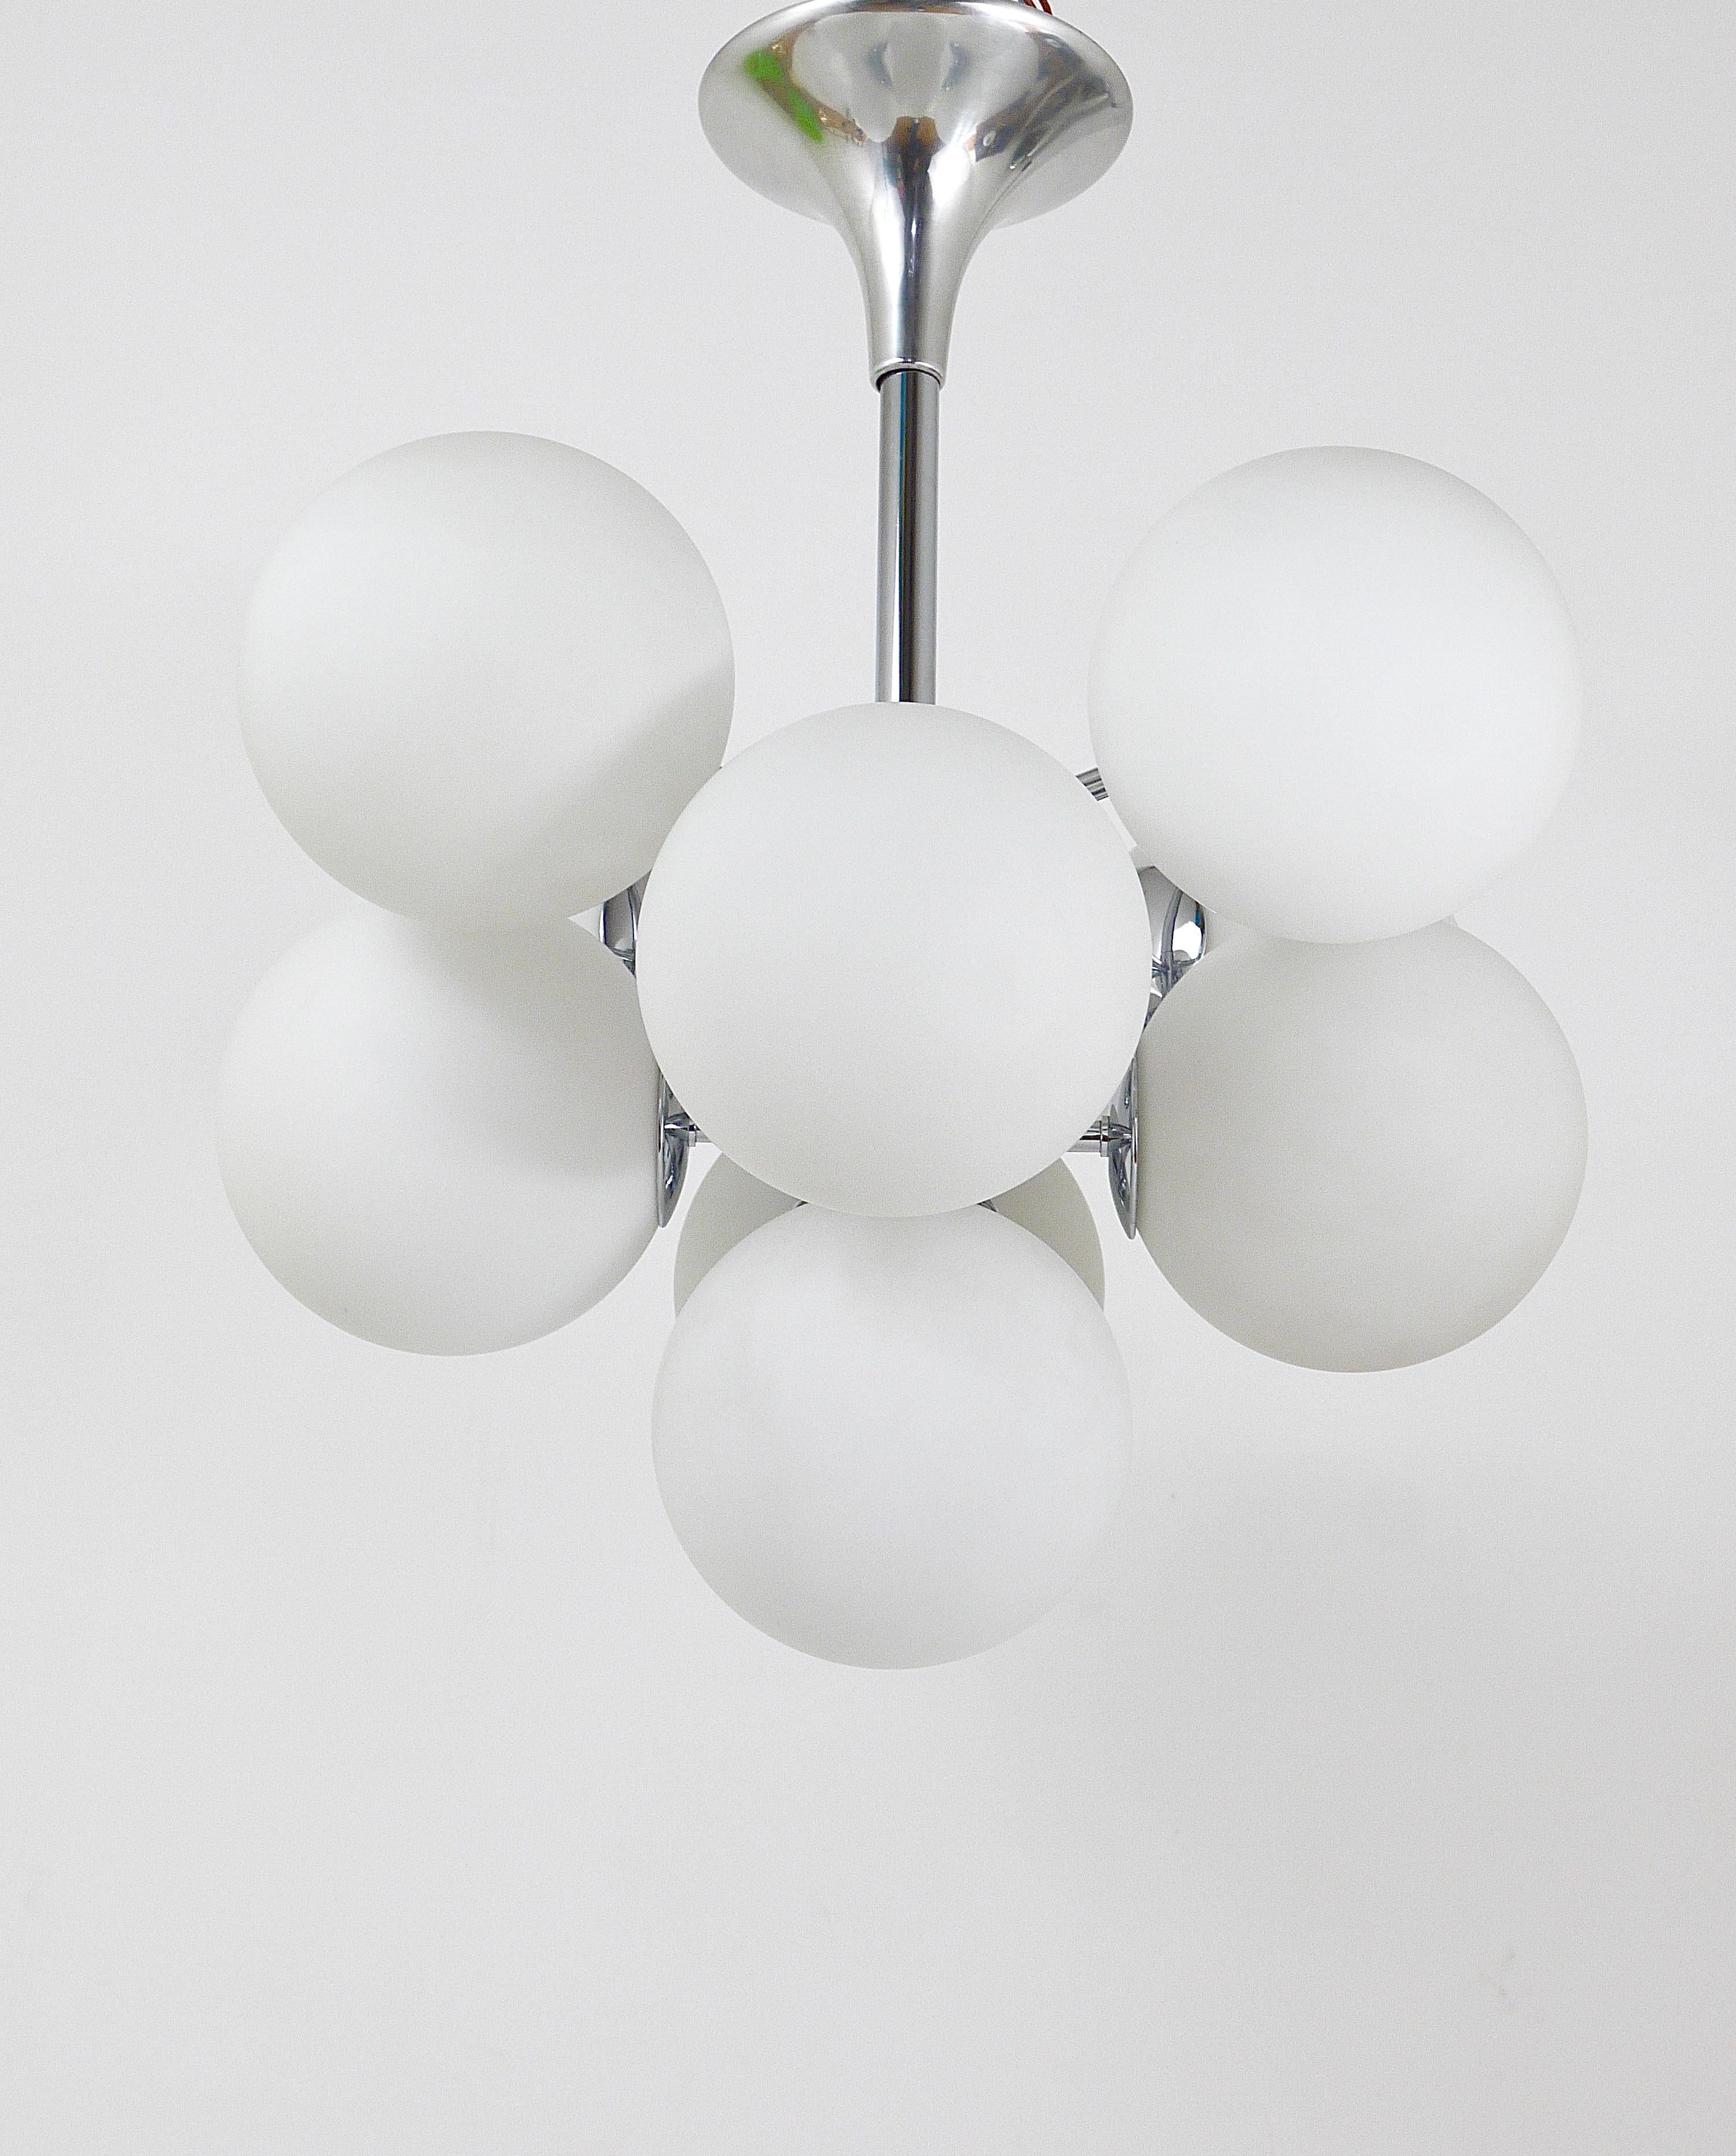 Chromed Atomic Chandelier with White Glass Globes, Temde, Switzerland For Sale 6